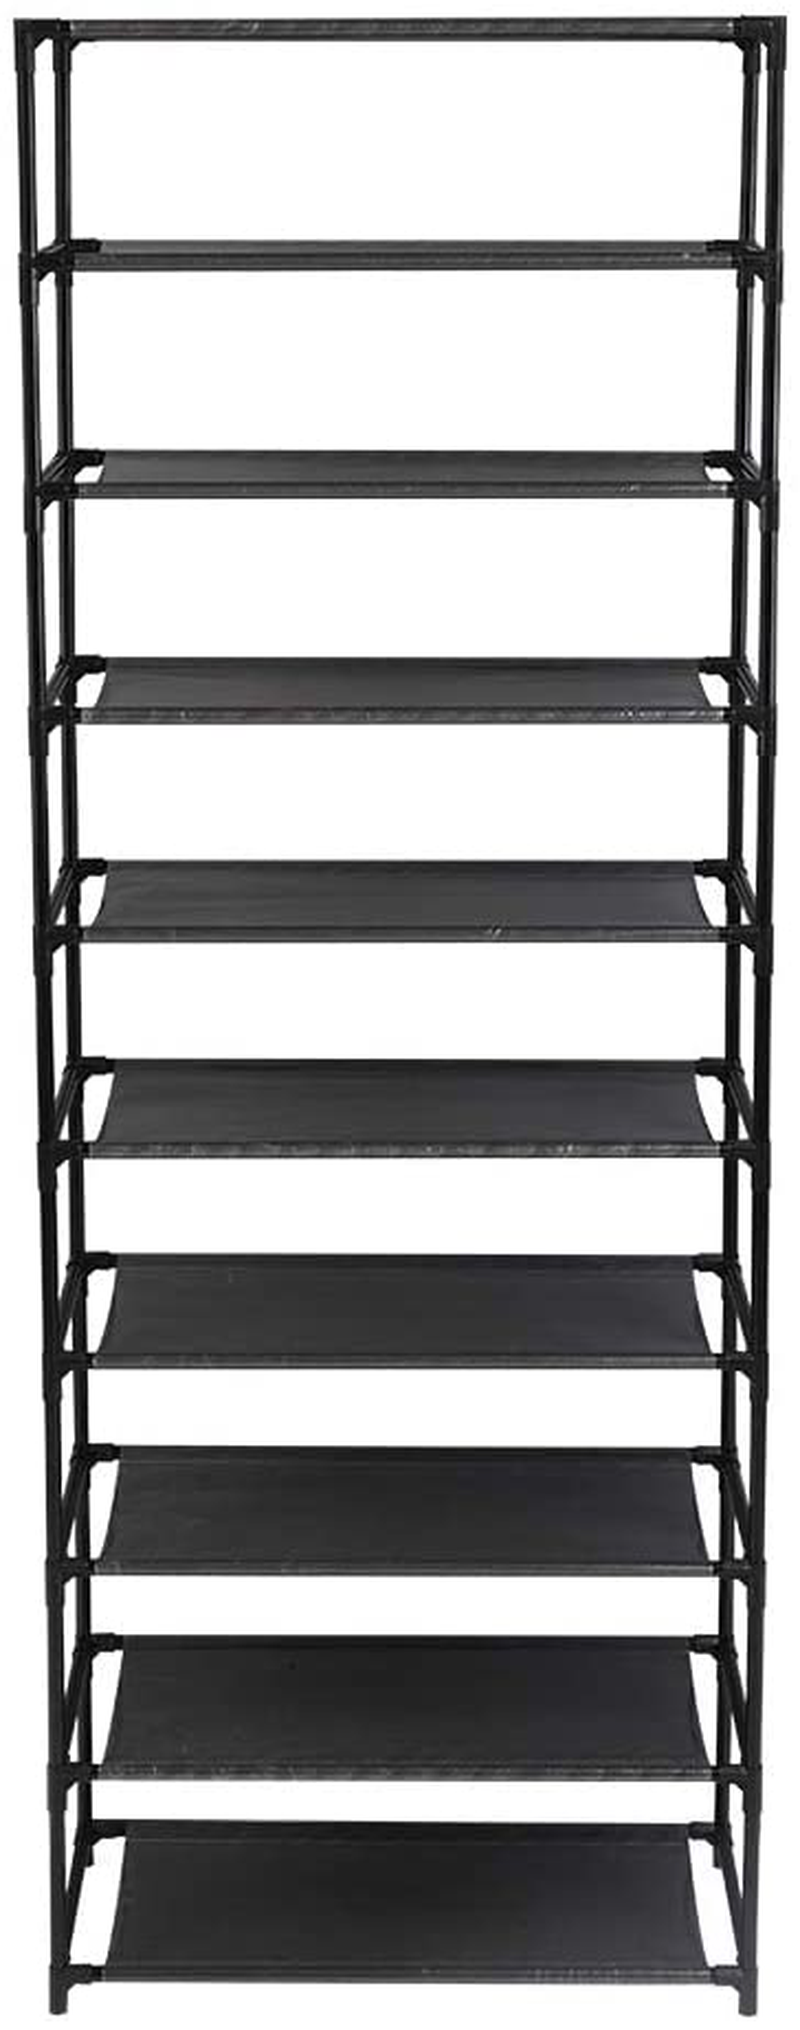 SLCSY 10 Tier Stackable Shoe Rack Storage Shelves - Stainless Steel Frame Holds 50 Pairs of Shoes Furniture > Cabinets & Storage > Armoires & Wardrobes SLCSY   